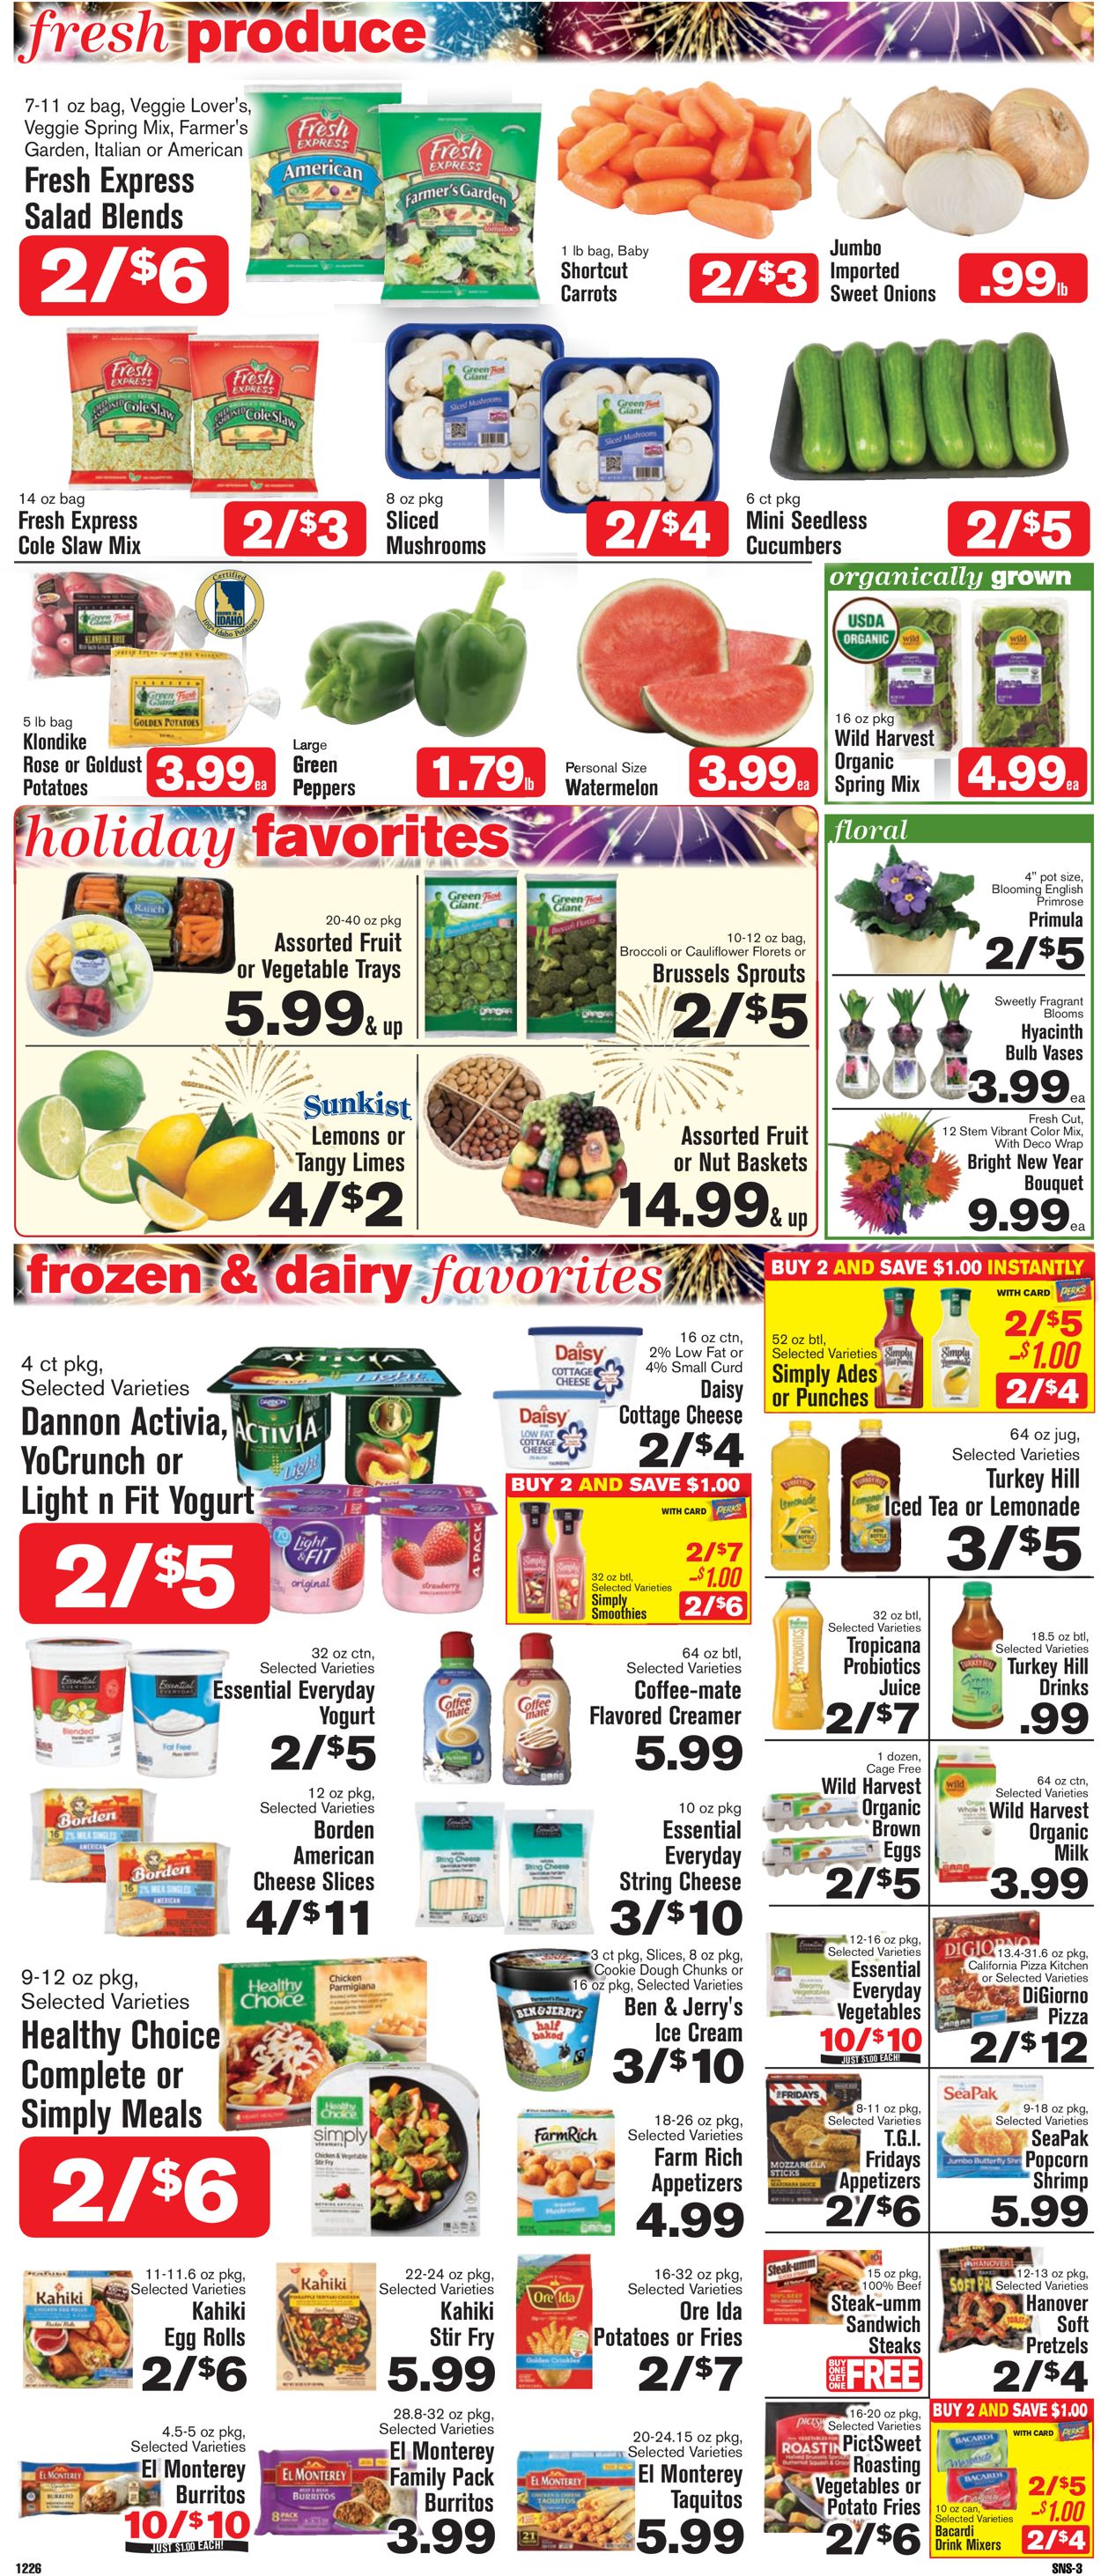 Catalogue Shop ‘n Save - New Year's Ad 2019/2020 from 12/26/2019